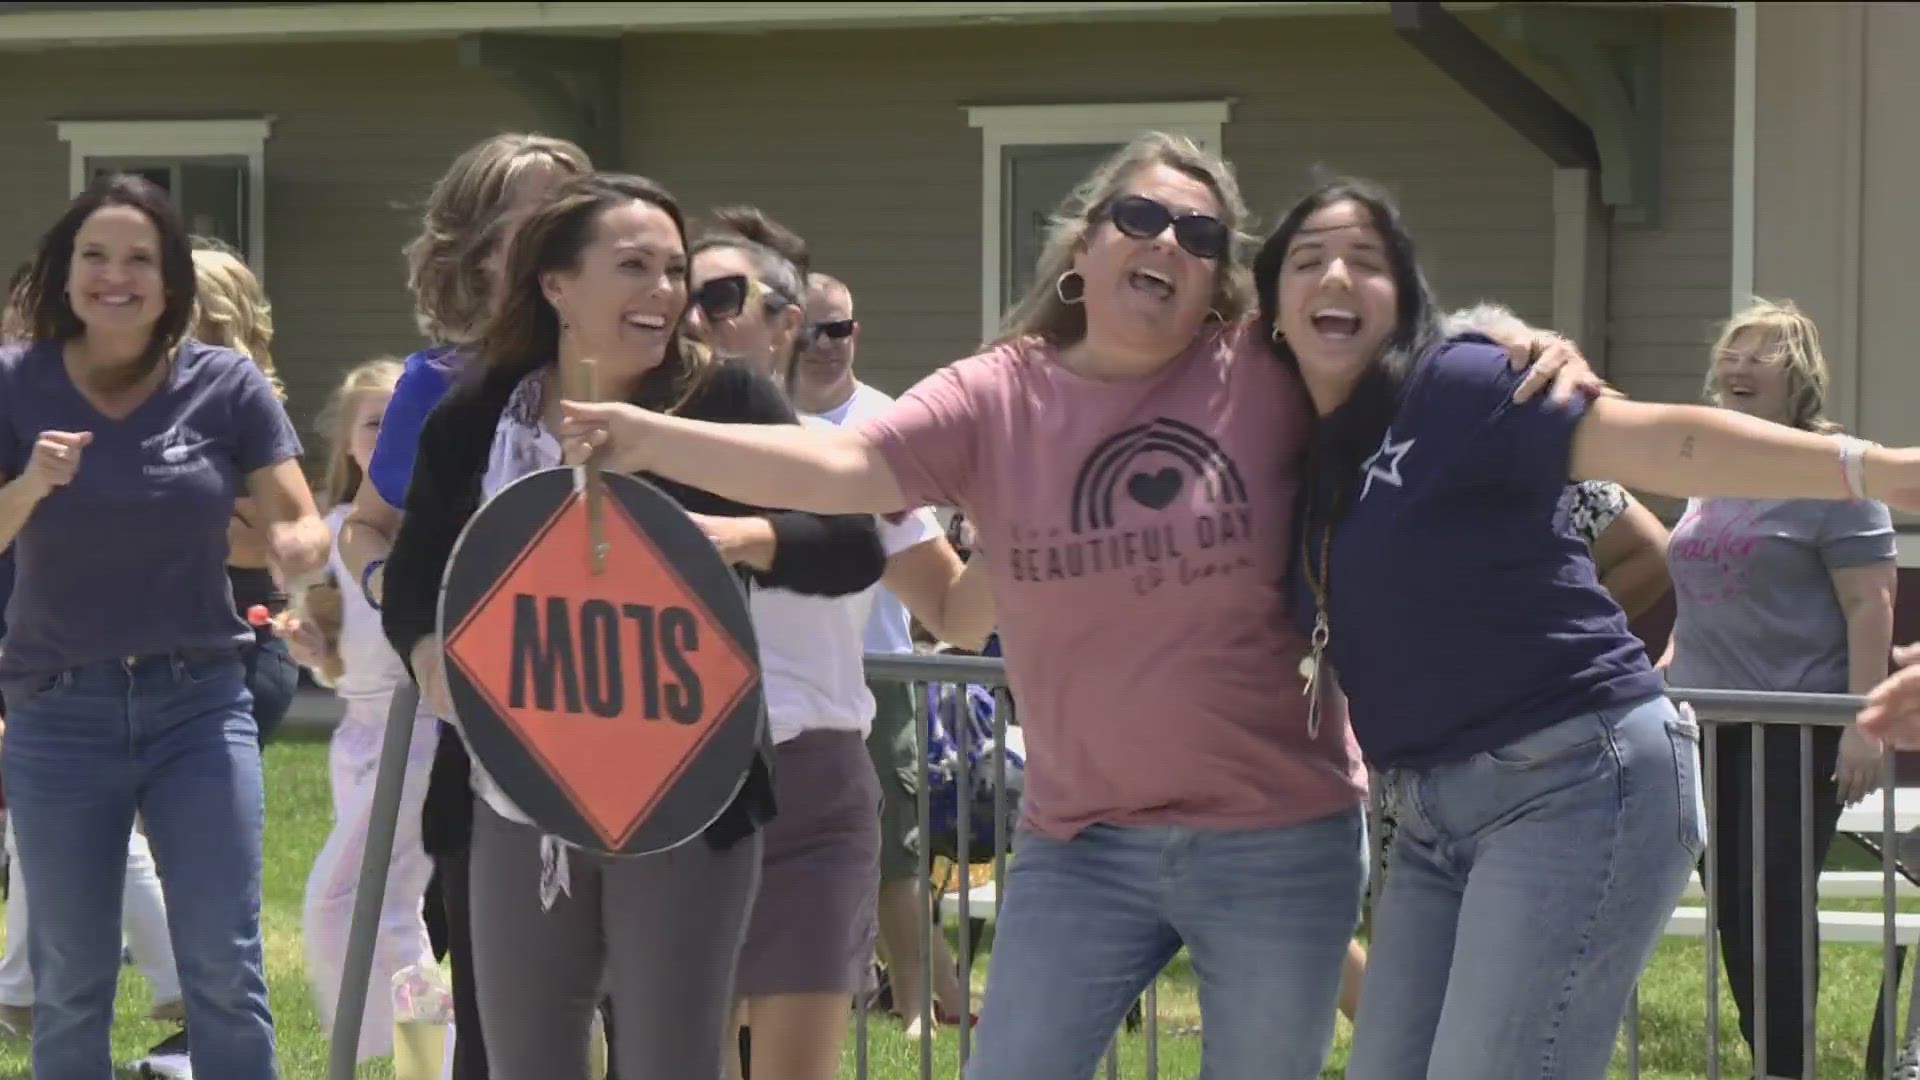 North Star Public Charter School students and staff celebrated the last day of school in style on Friday with a dance party and bus send-off.